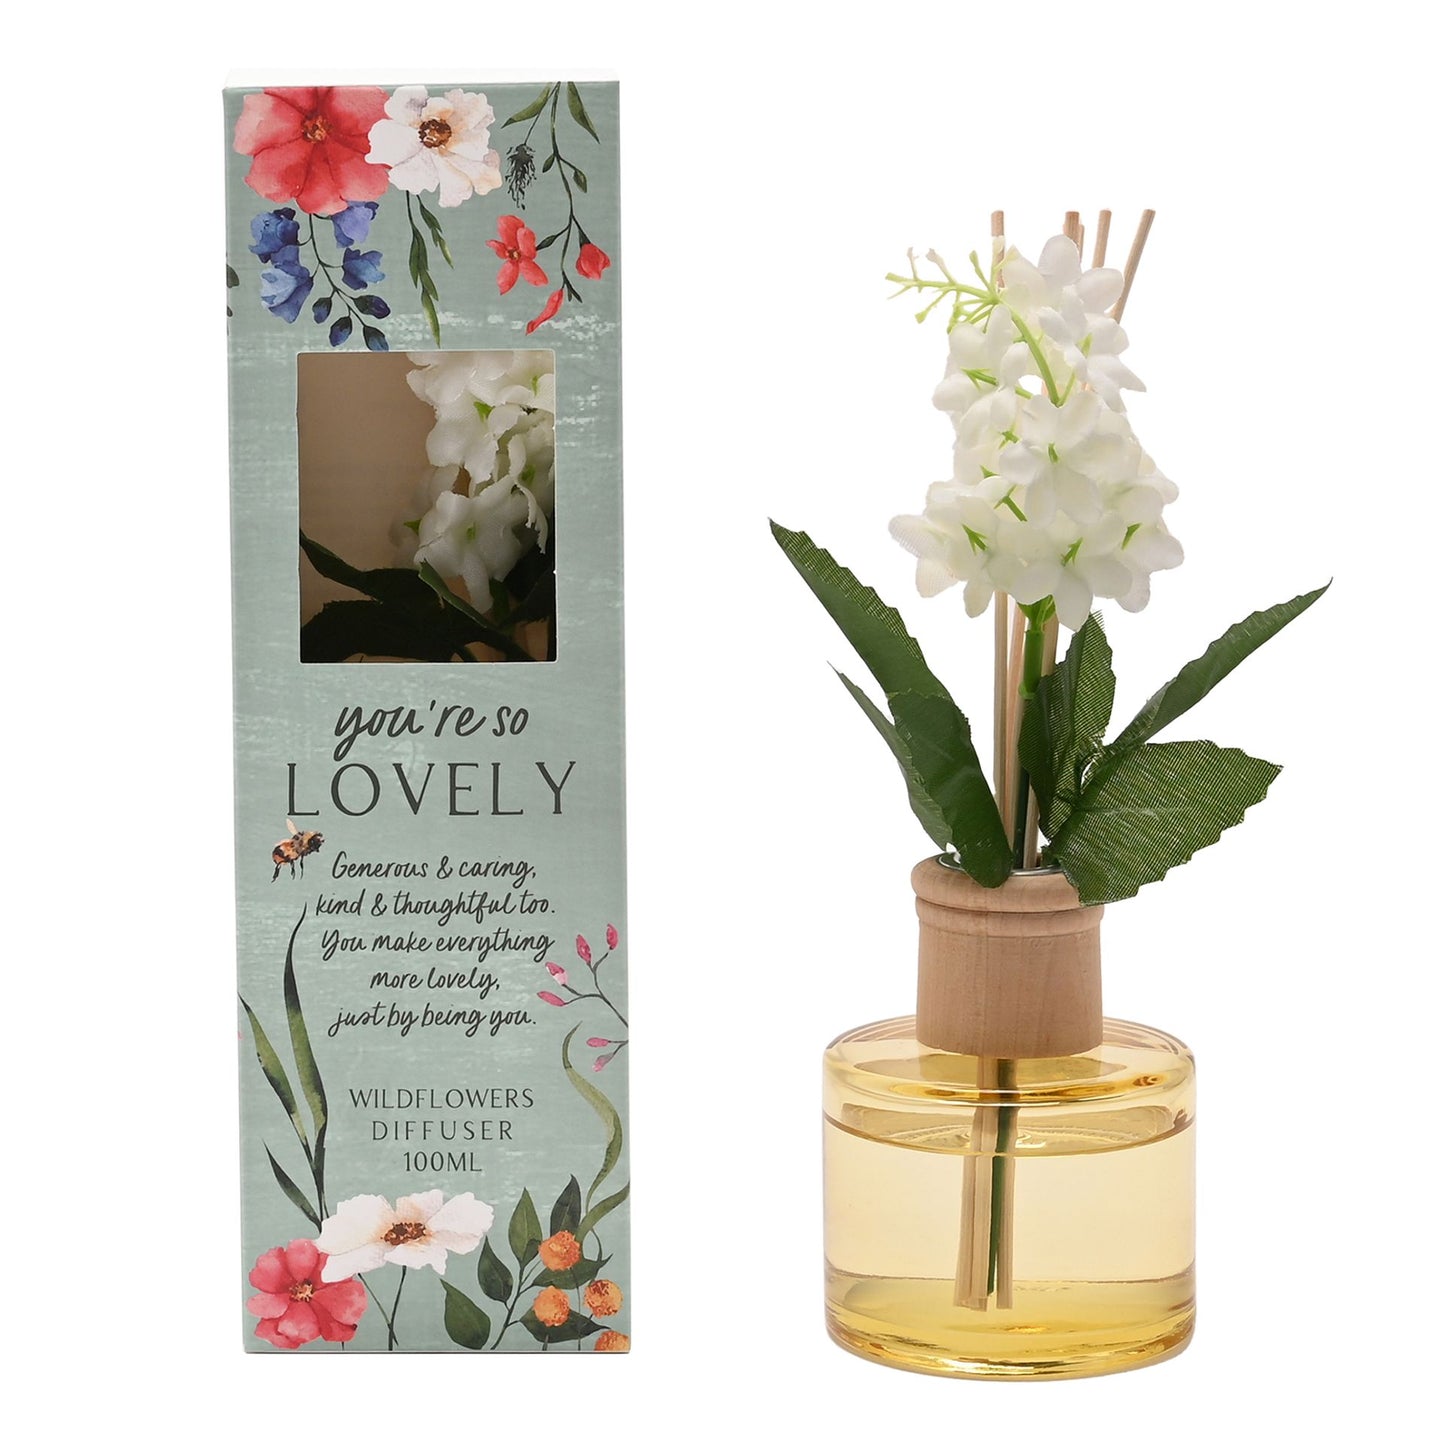 THE COTTAGE GARDEN 100ML DIFFUSER "YOU'RE SO LOVELY"